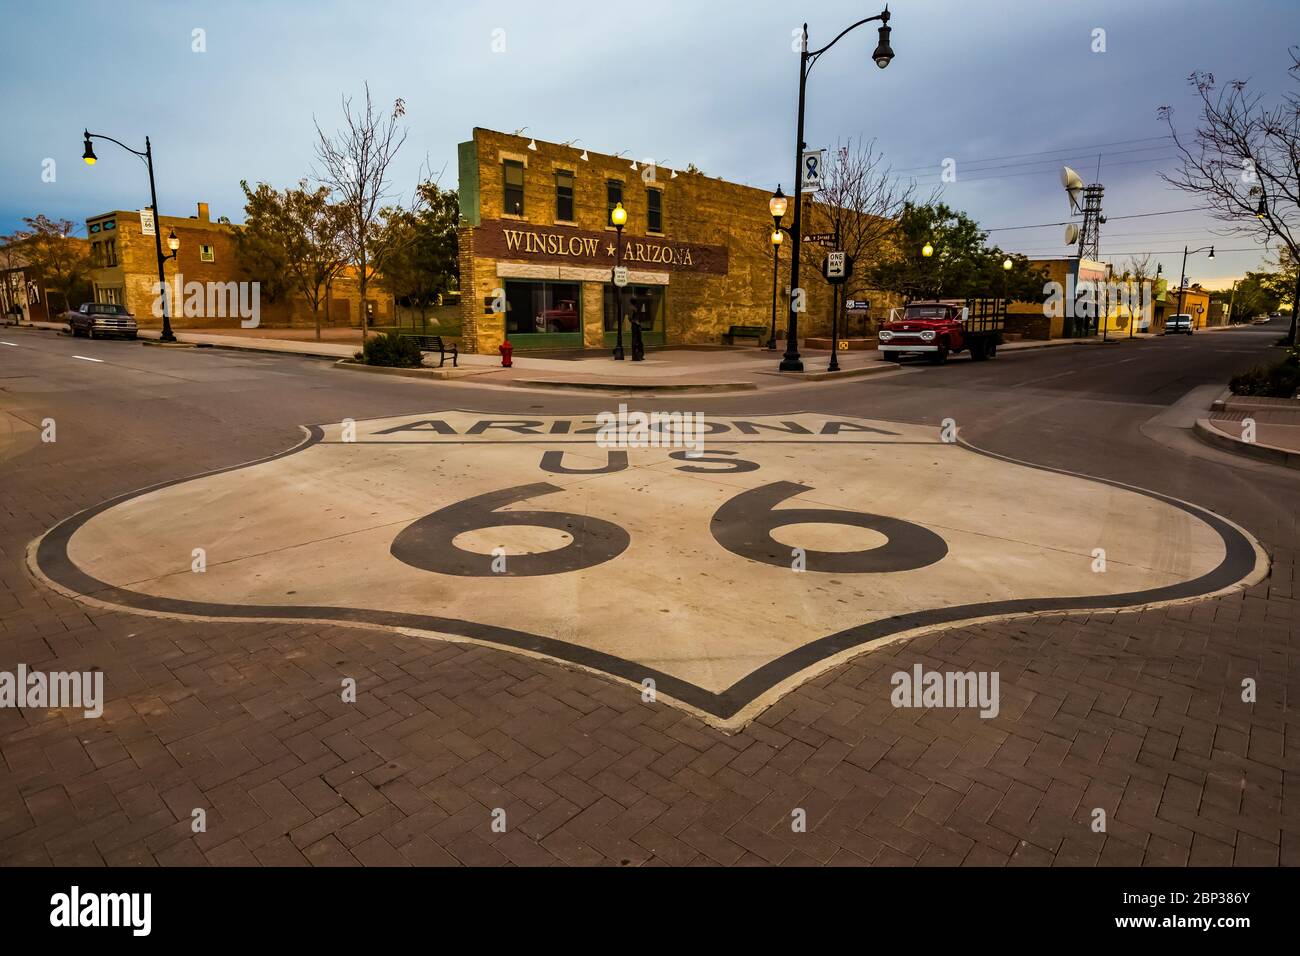 Standin' on the Corner Park and the intersection of Old Highway 66 and North Kinsley Avenue in Winslow, Arizona, a location made famous by The Eagles Stock Photo